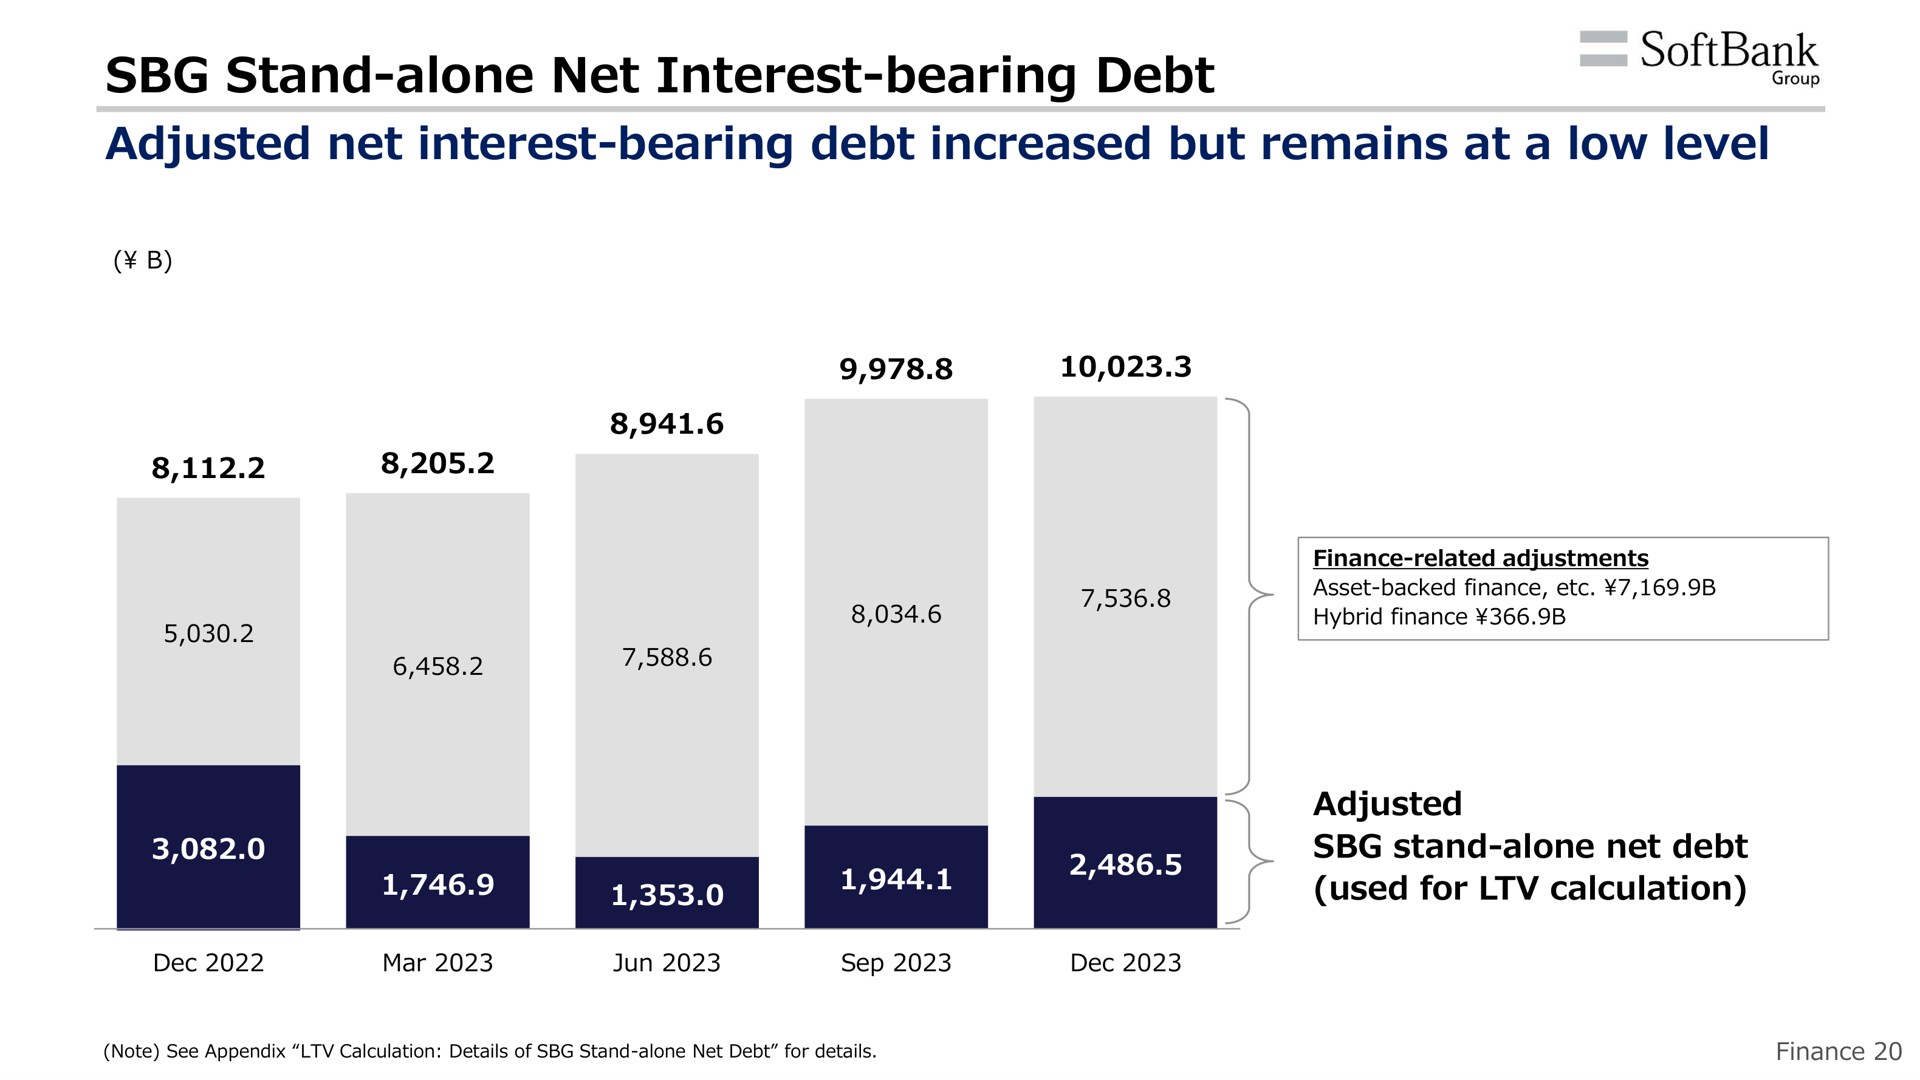 stand alone net interest bearing debt adjusted net interest bearing debt increased but remains at a low level | SoftBank